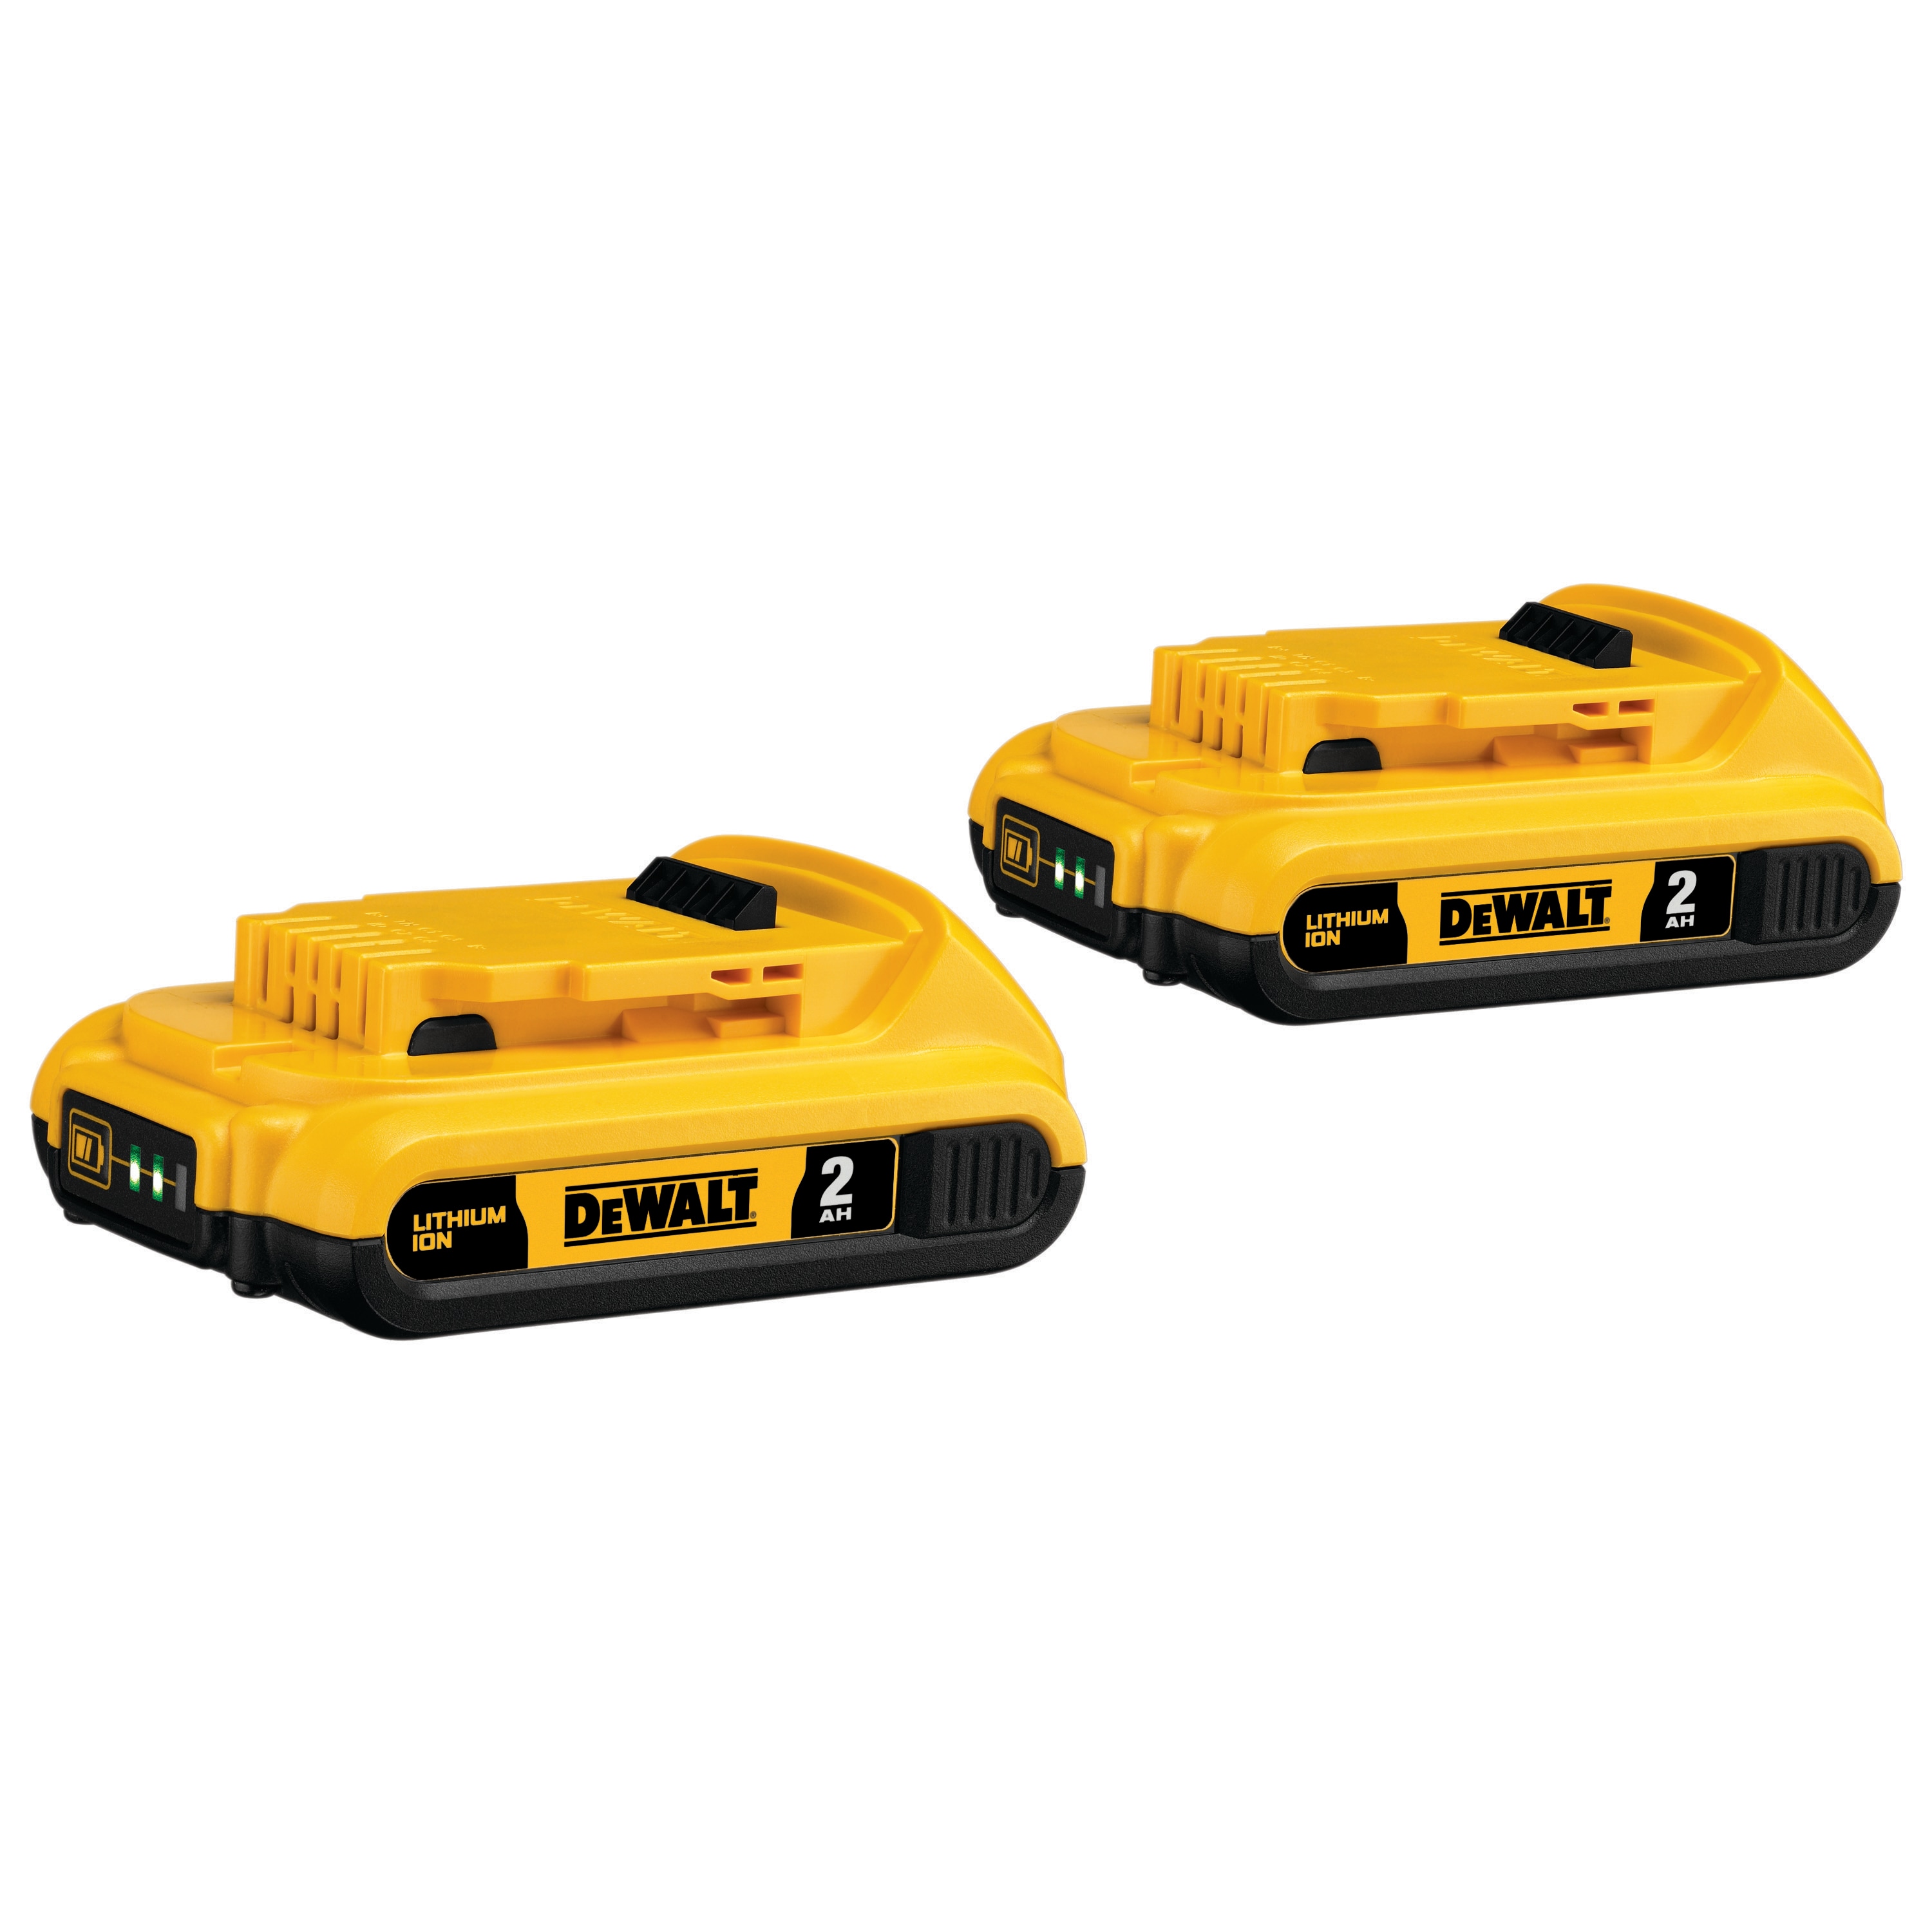 DEWALT 20 2-Pack 2 Amp-Hour; 2 Amp-Hour Lithium Battery Adapter Kit (Charger Included) in the Power Tool Batteries & Chargers at Lowes.com